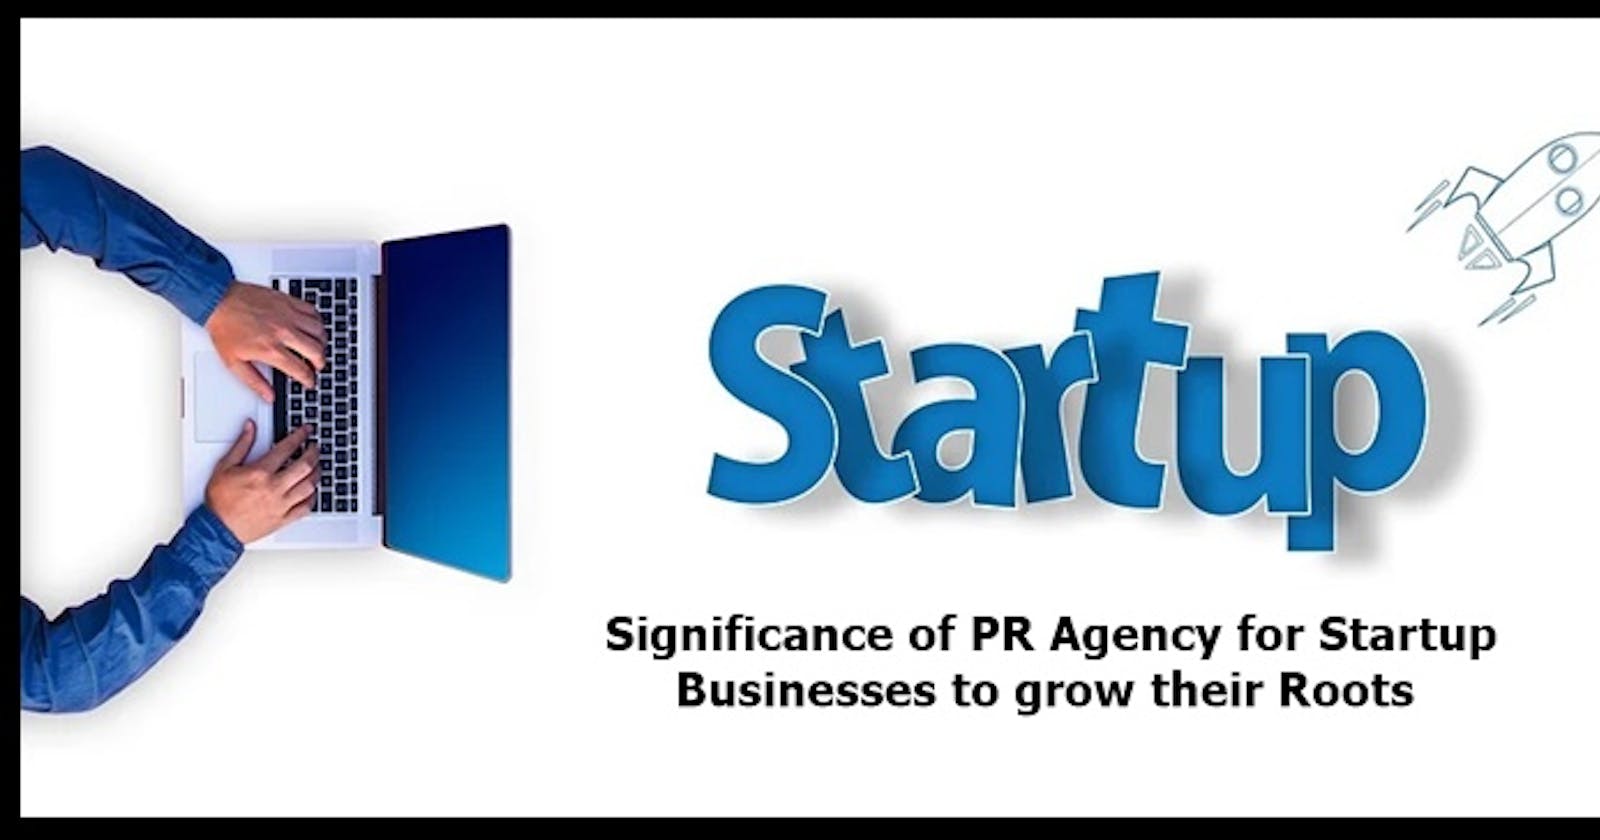 Significance of PR Agency for Startup Businesses to grow their Roots